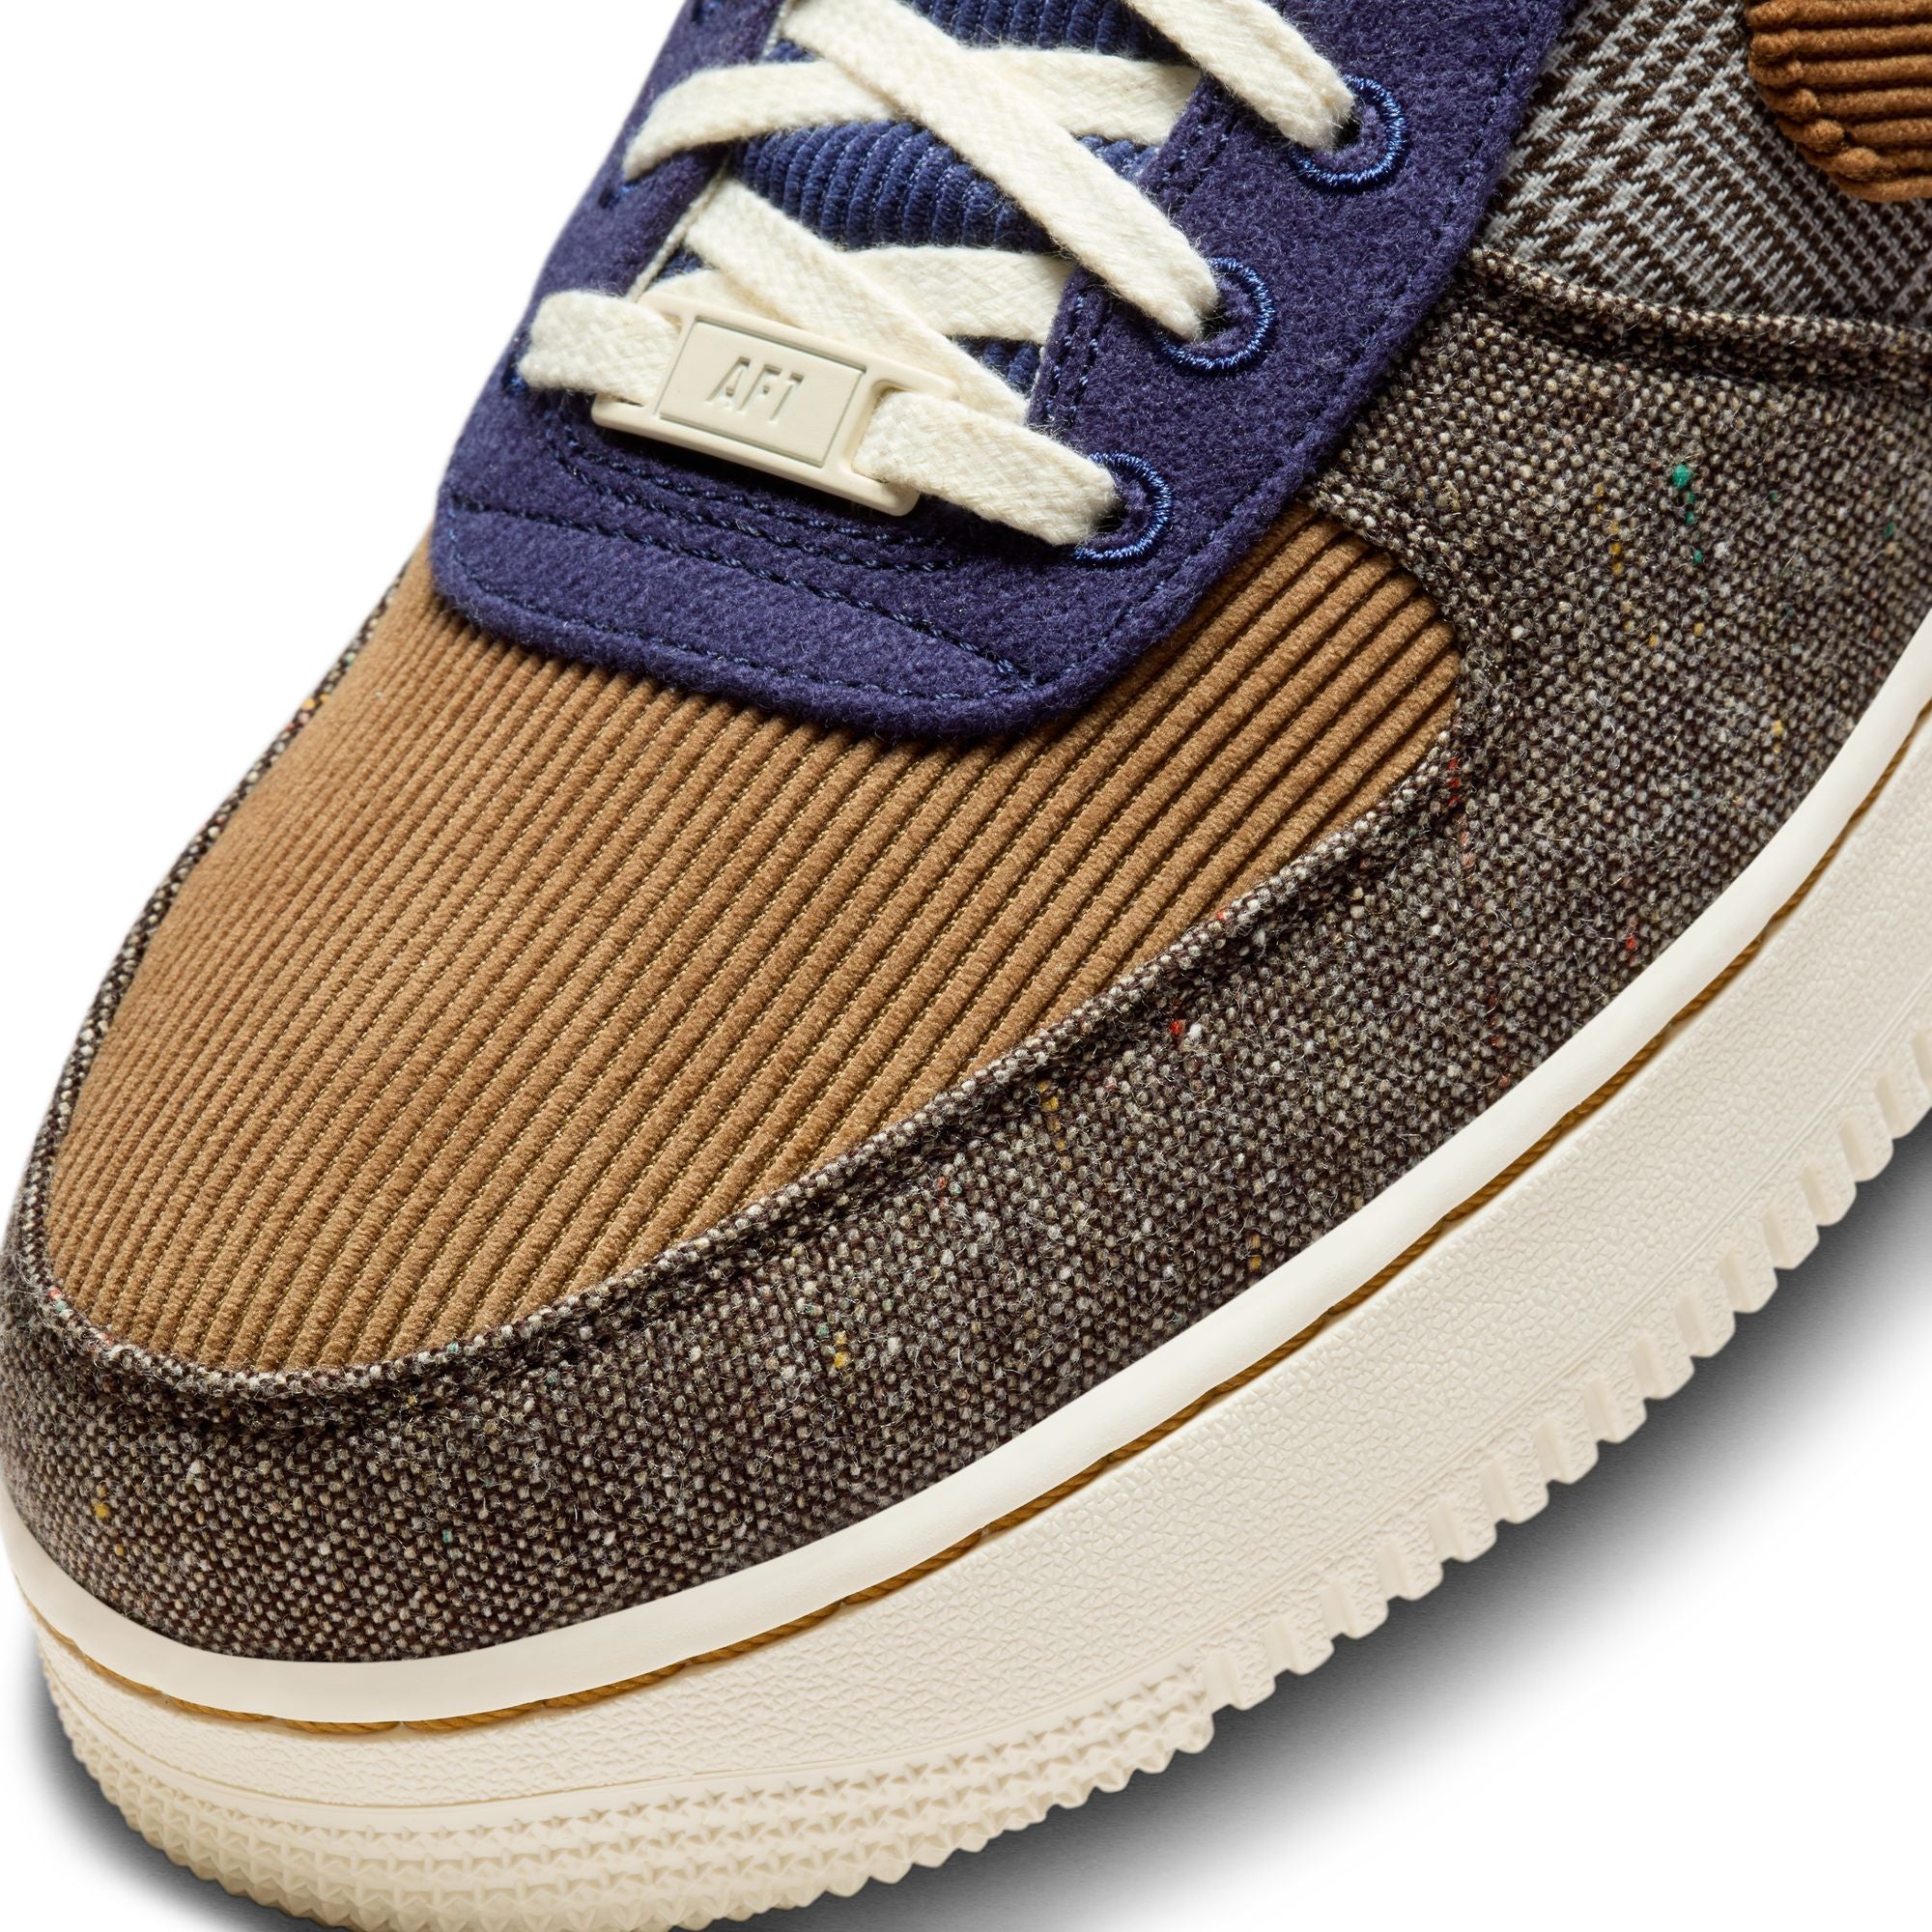 NIKE - Air Force 1 '07 Prm - (Midnight Navy/Ale Brown-Pale I)